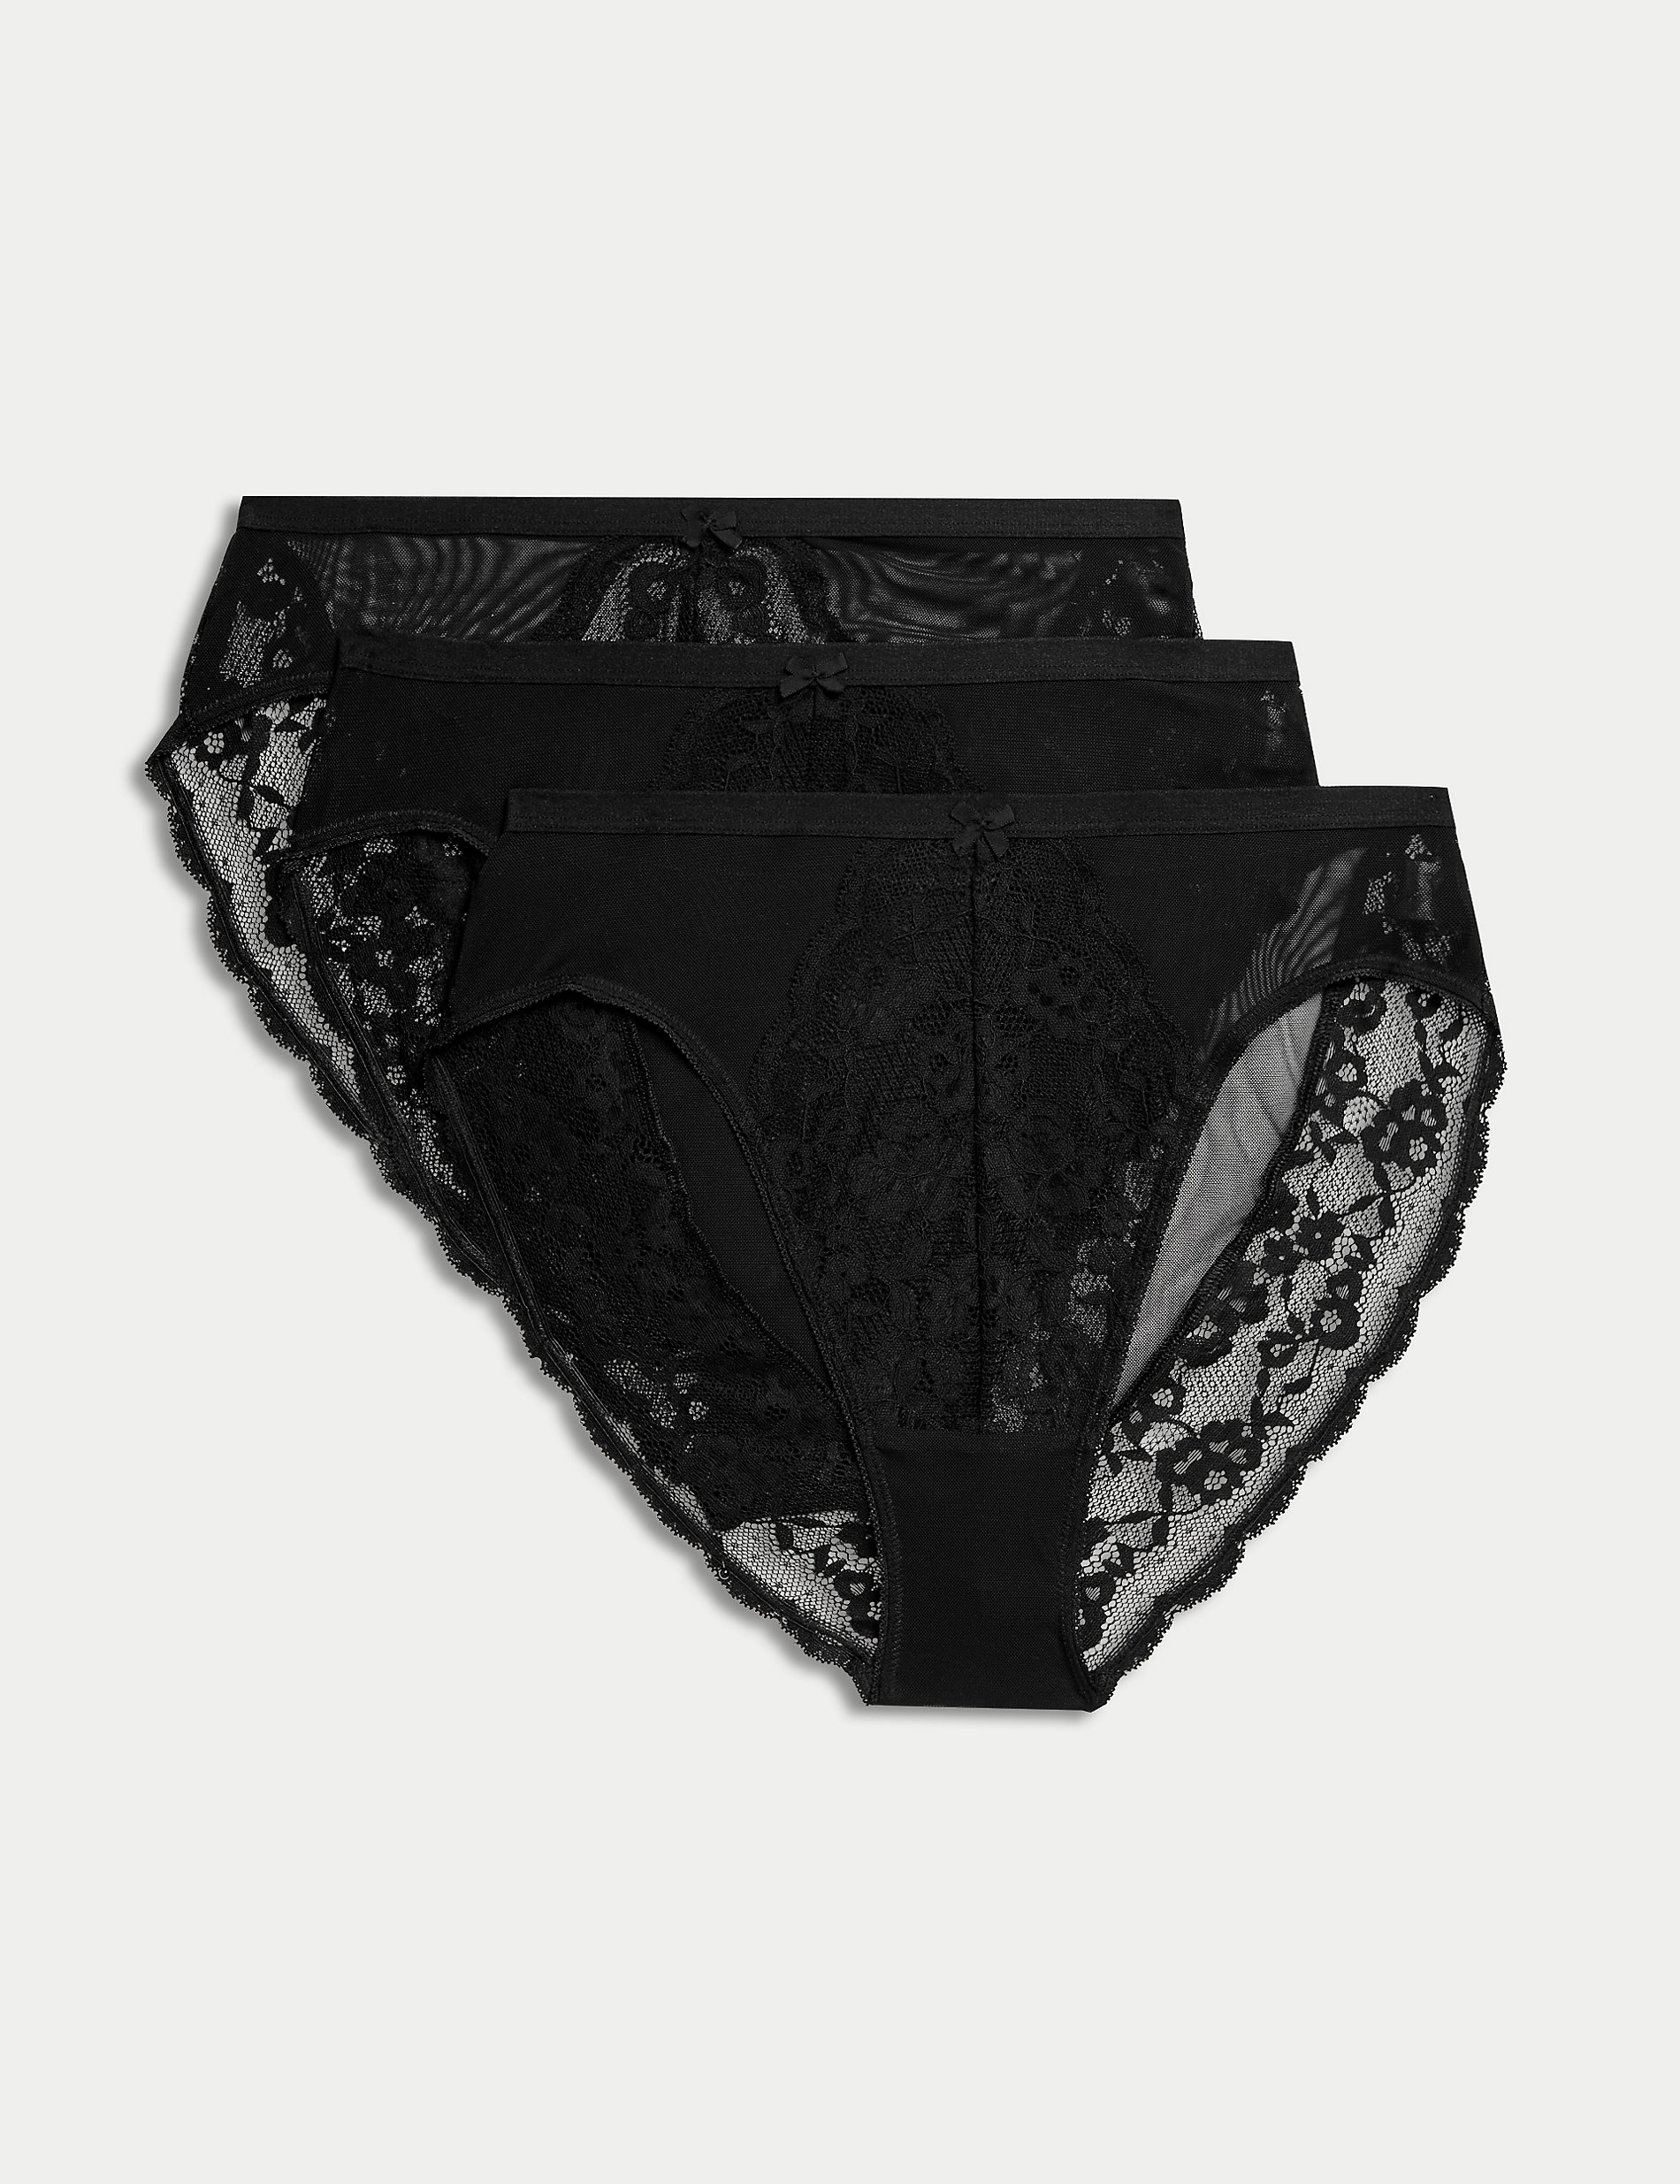 M&S COLLECTION Lace Trim High Leg Knickers 